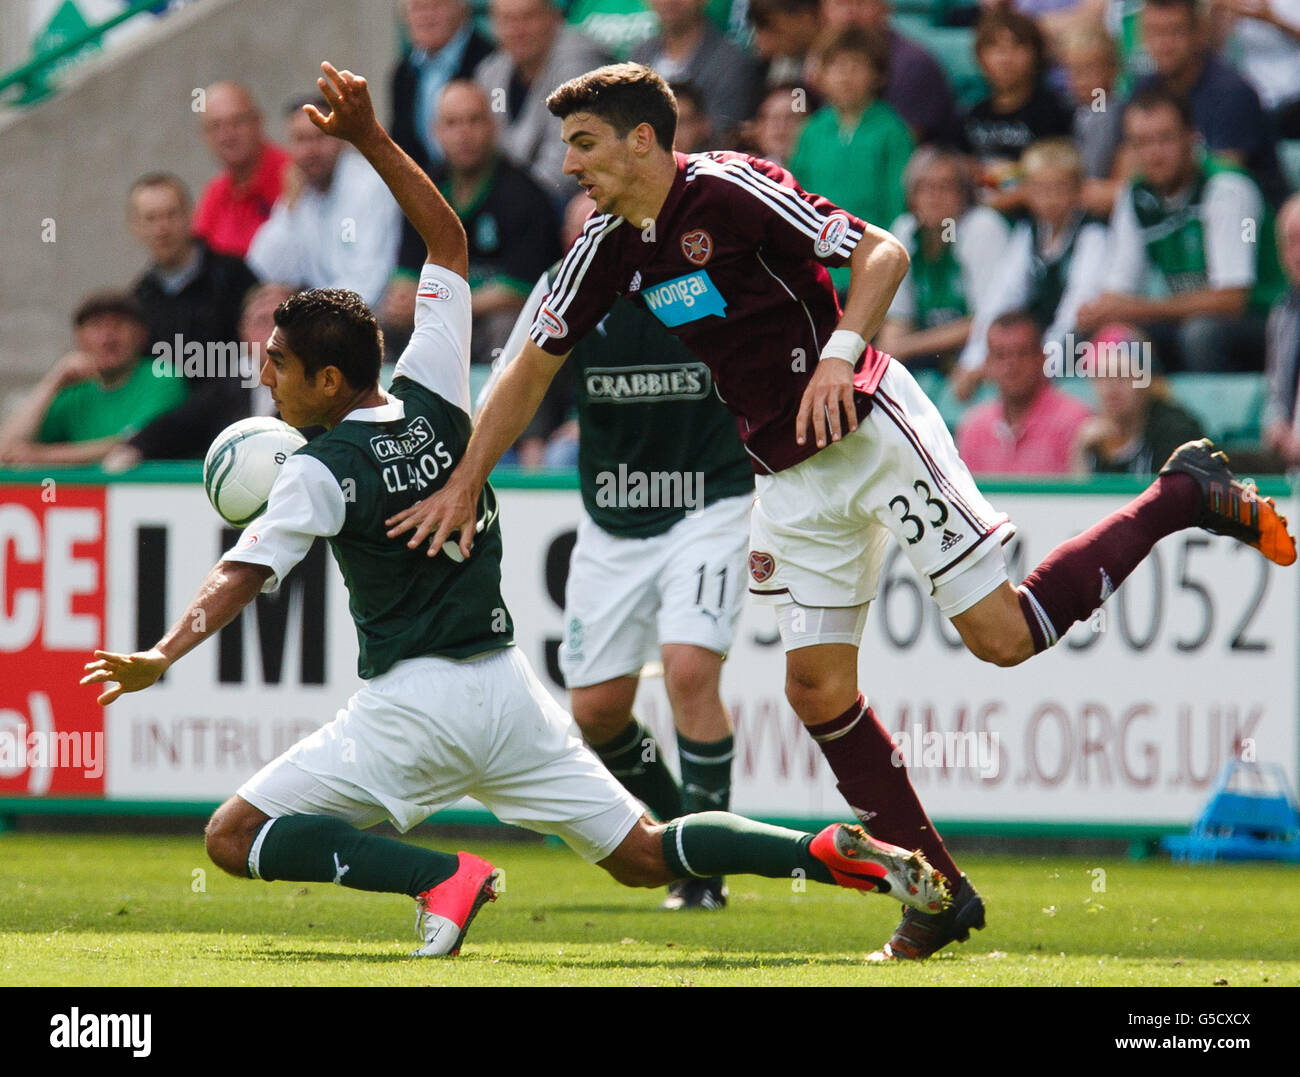 Hibernian's Jorge Claros (left) is tackled by Hearts' Callum Paterson during the Clydesdale Bank Scottish Premier League match at Easter Road, Edinburgh. Stock Photo